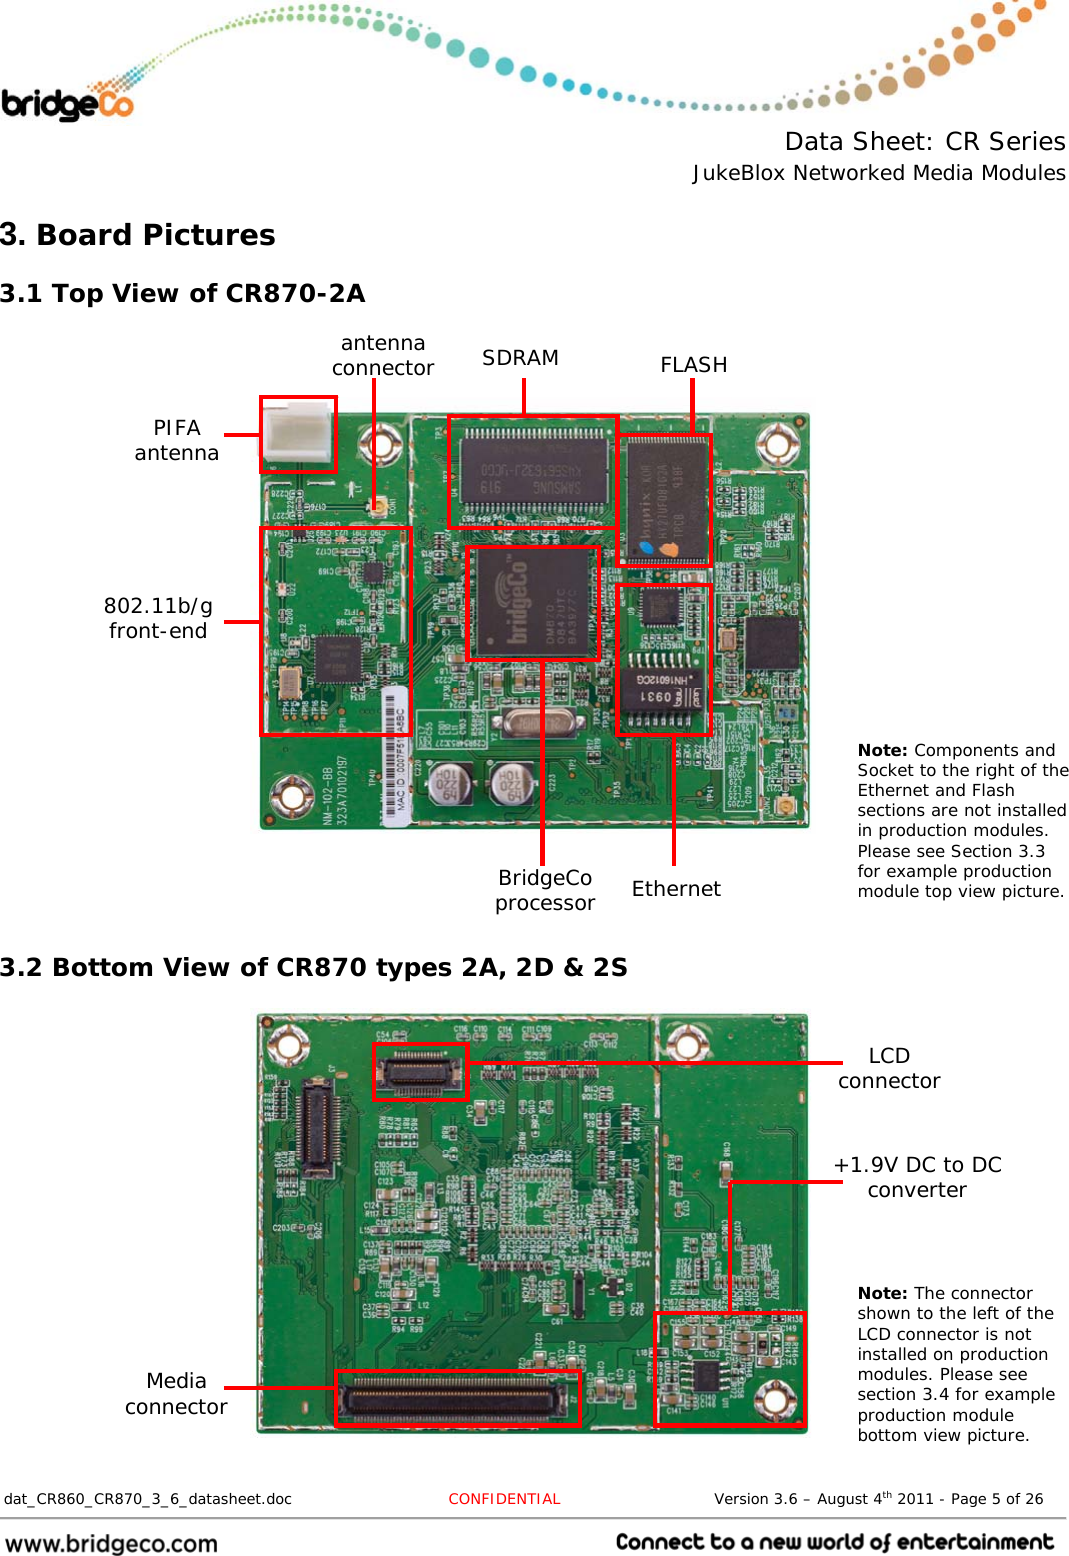  Data Sheet: CR Series JukeBlox Networked Media Modules  dat_CR860_CR870_3_6_datasheet.doc  CONFIDENTIAL                              Version 3.6 – August 4th 2011 - Page 5 of 26                                 3. Board Pictures 3.1 Top View of CR870-2A                        3.2 Bottom View of CR870 types 2A, 2D &amp; 2S                PIFA antenna 802.11b/g front-end BridgeCo processor Ethernet FLASH SDRAM antenna connector Media connector LCD connector Note: Components and Socket to the right of the Ethernet and Flash sections are not installed in production modules. Please see Section 3.3 for example production module top view picture. Note: The connector shown to the left of the LCD connector is not installed on production modules. Please see section 3.4 for example production module bottom view picture. +1.9V DC to DC converter 